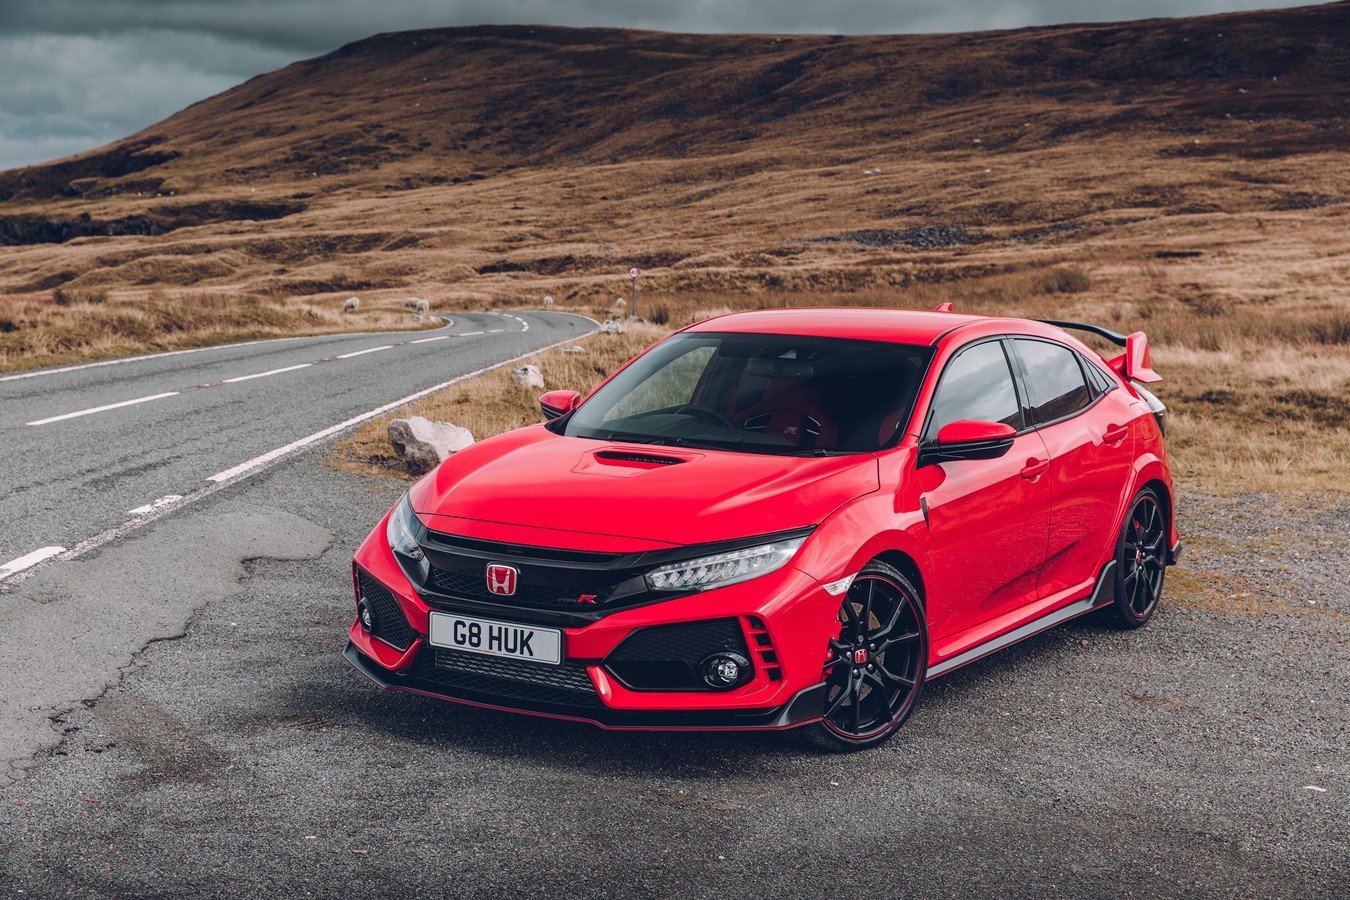 Honda Civic Type R retains the Auto Express Best Hot Hatch award for the third year running